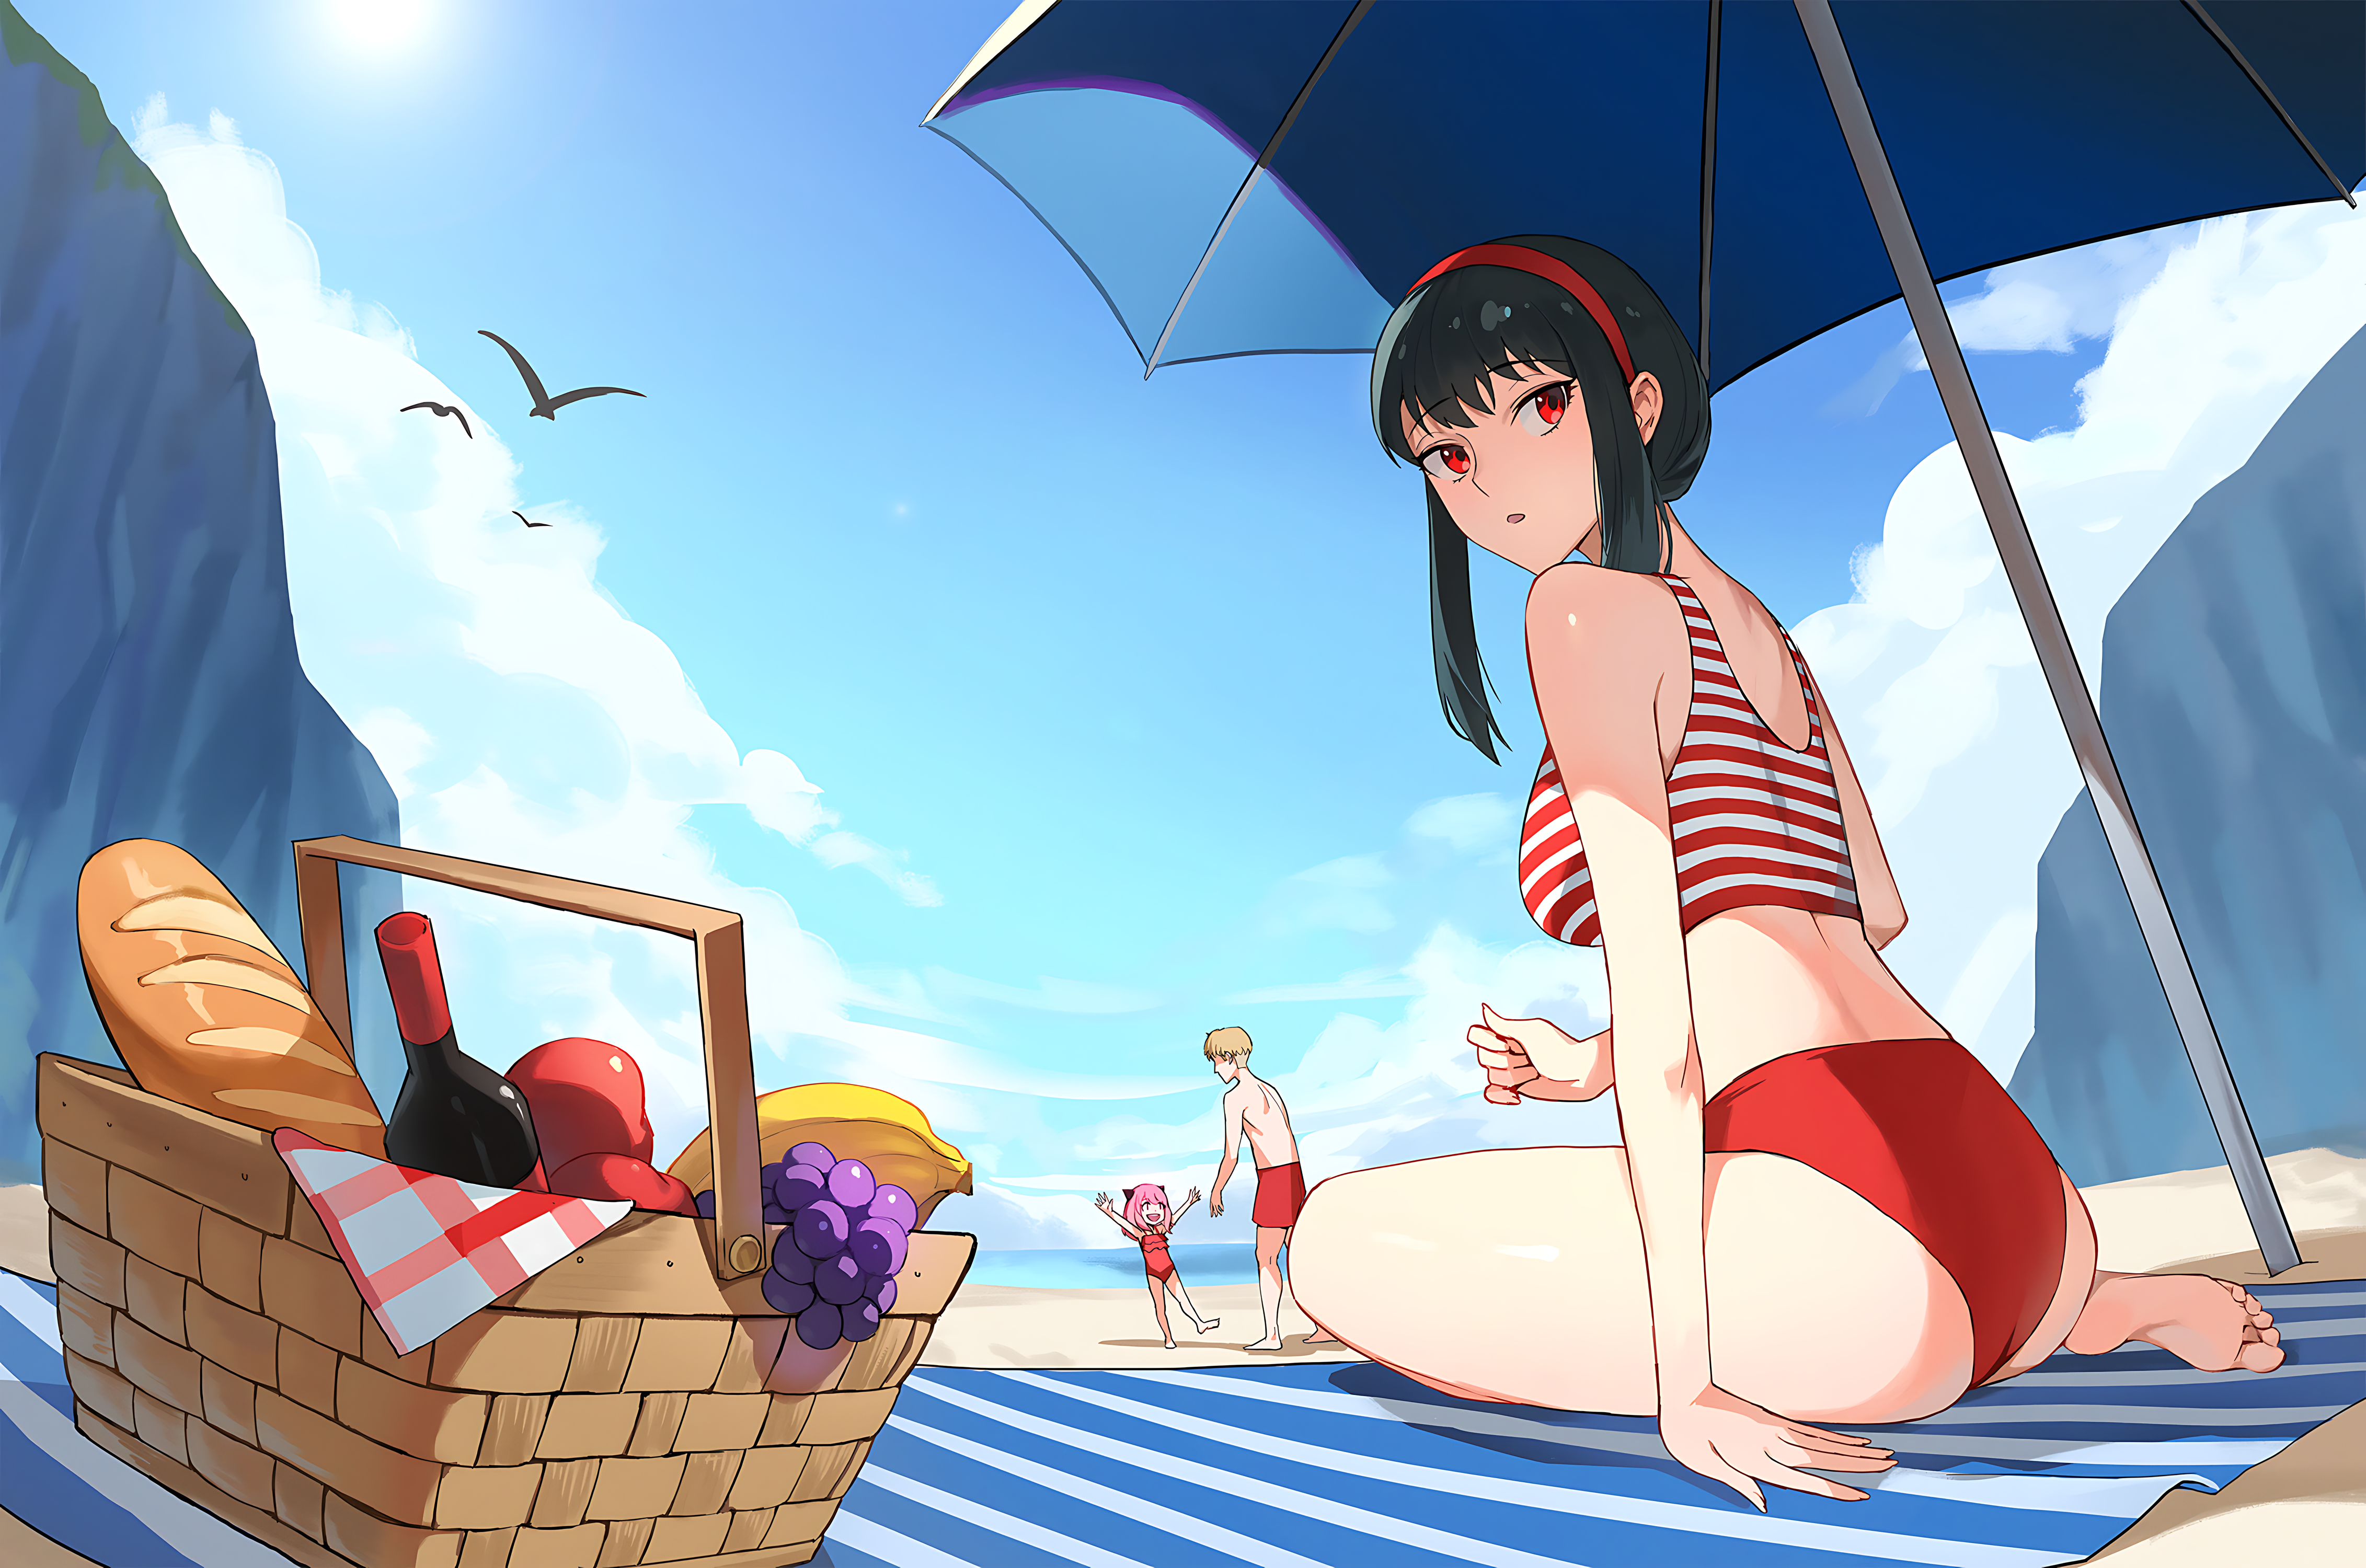 Anime 4526x3000 Yor Forger Anya Forger Loid Forger Spy x Family anime anime girls artwork drawing 2D fan art Jason Kim beach looking back picnic striped beach umbrella food sky clouds beach towel red swimsuit bright